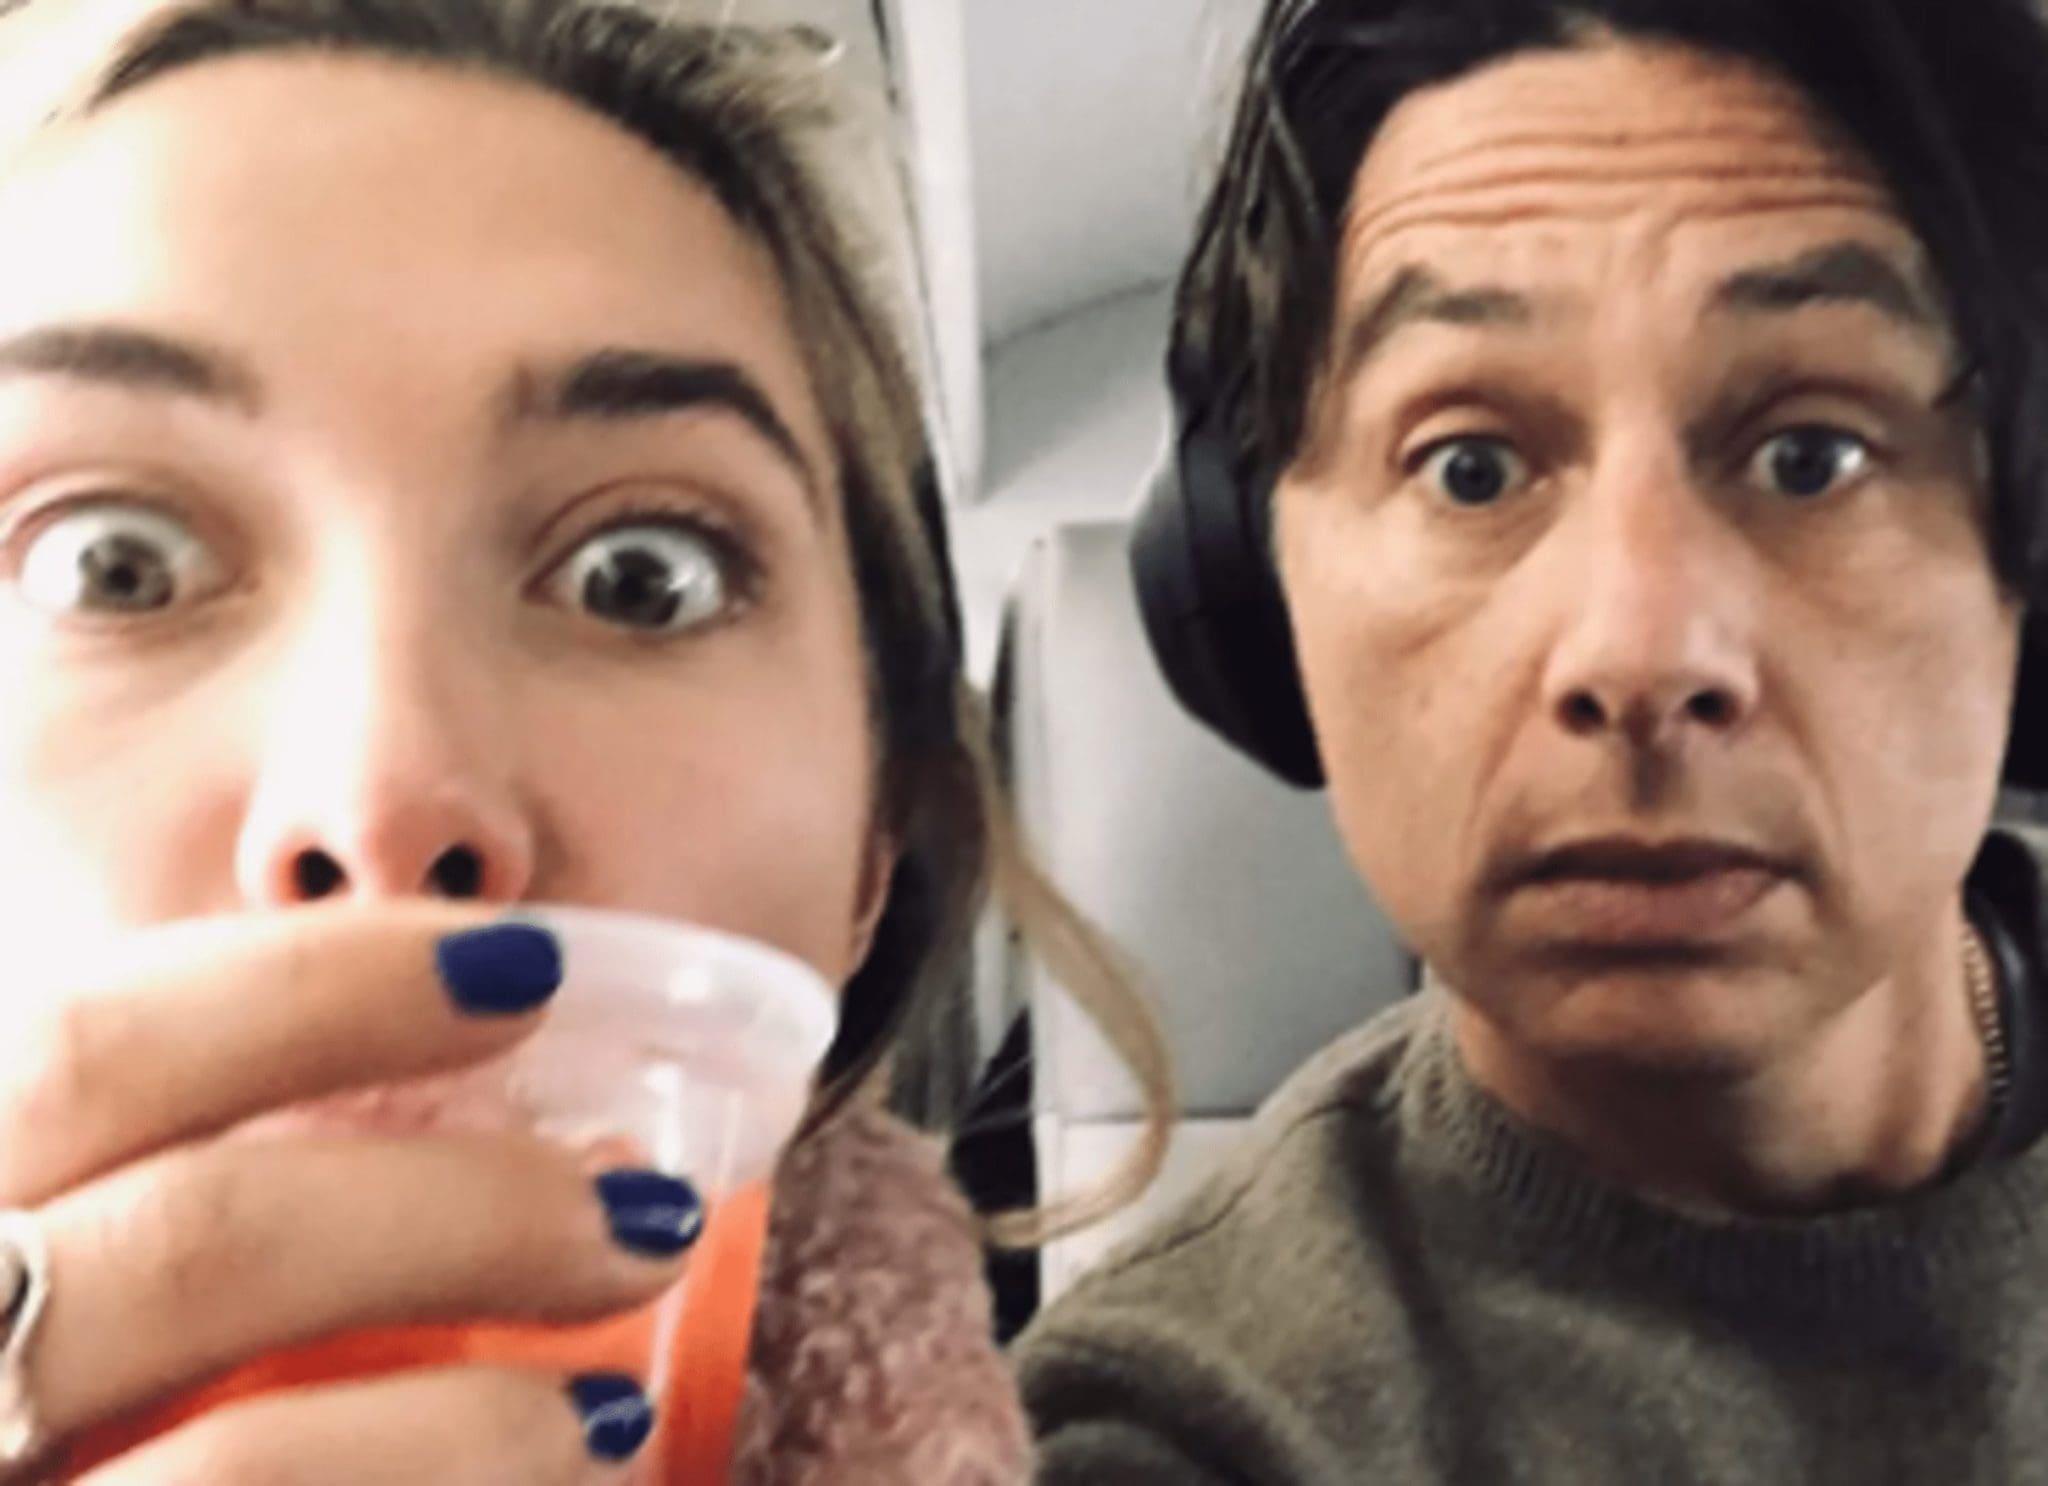 Zach Braff And Florence Pugh Dated For Almost Three Years Despite Having A 21-Year Age Difference That Was Constantly Criticized